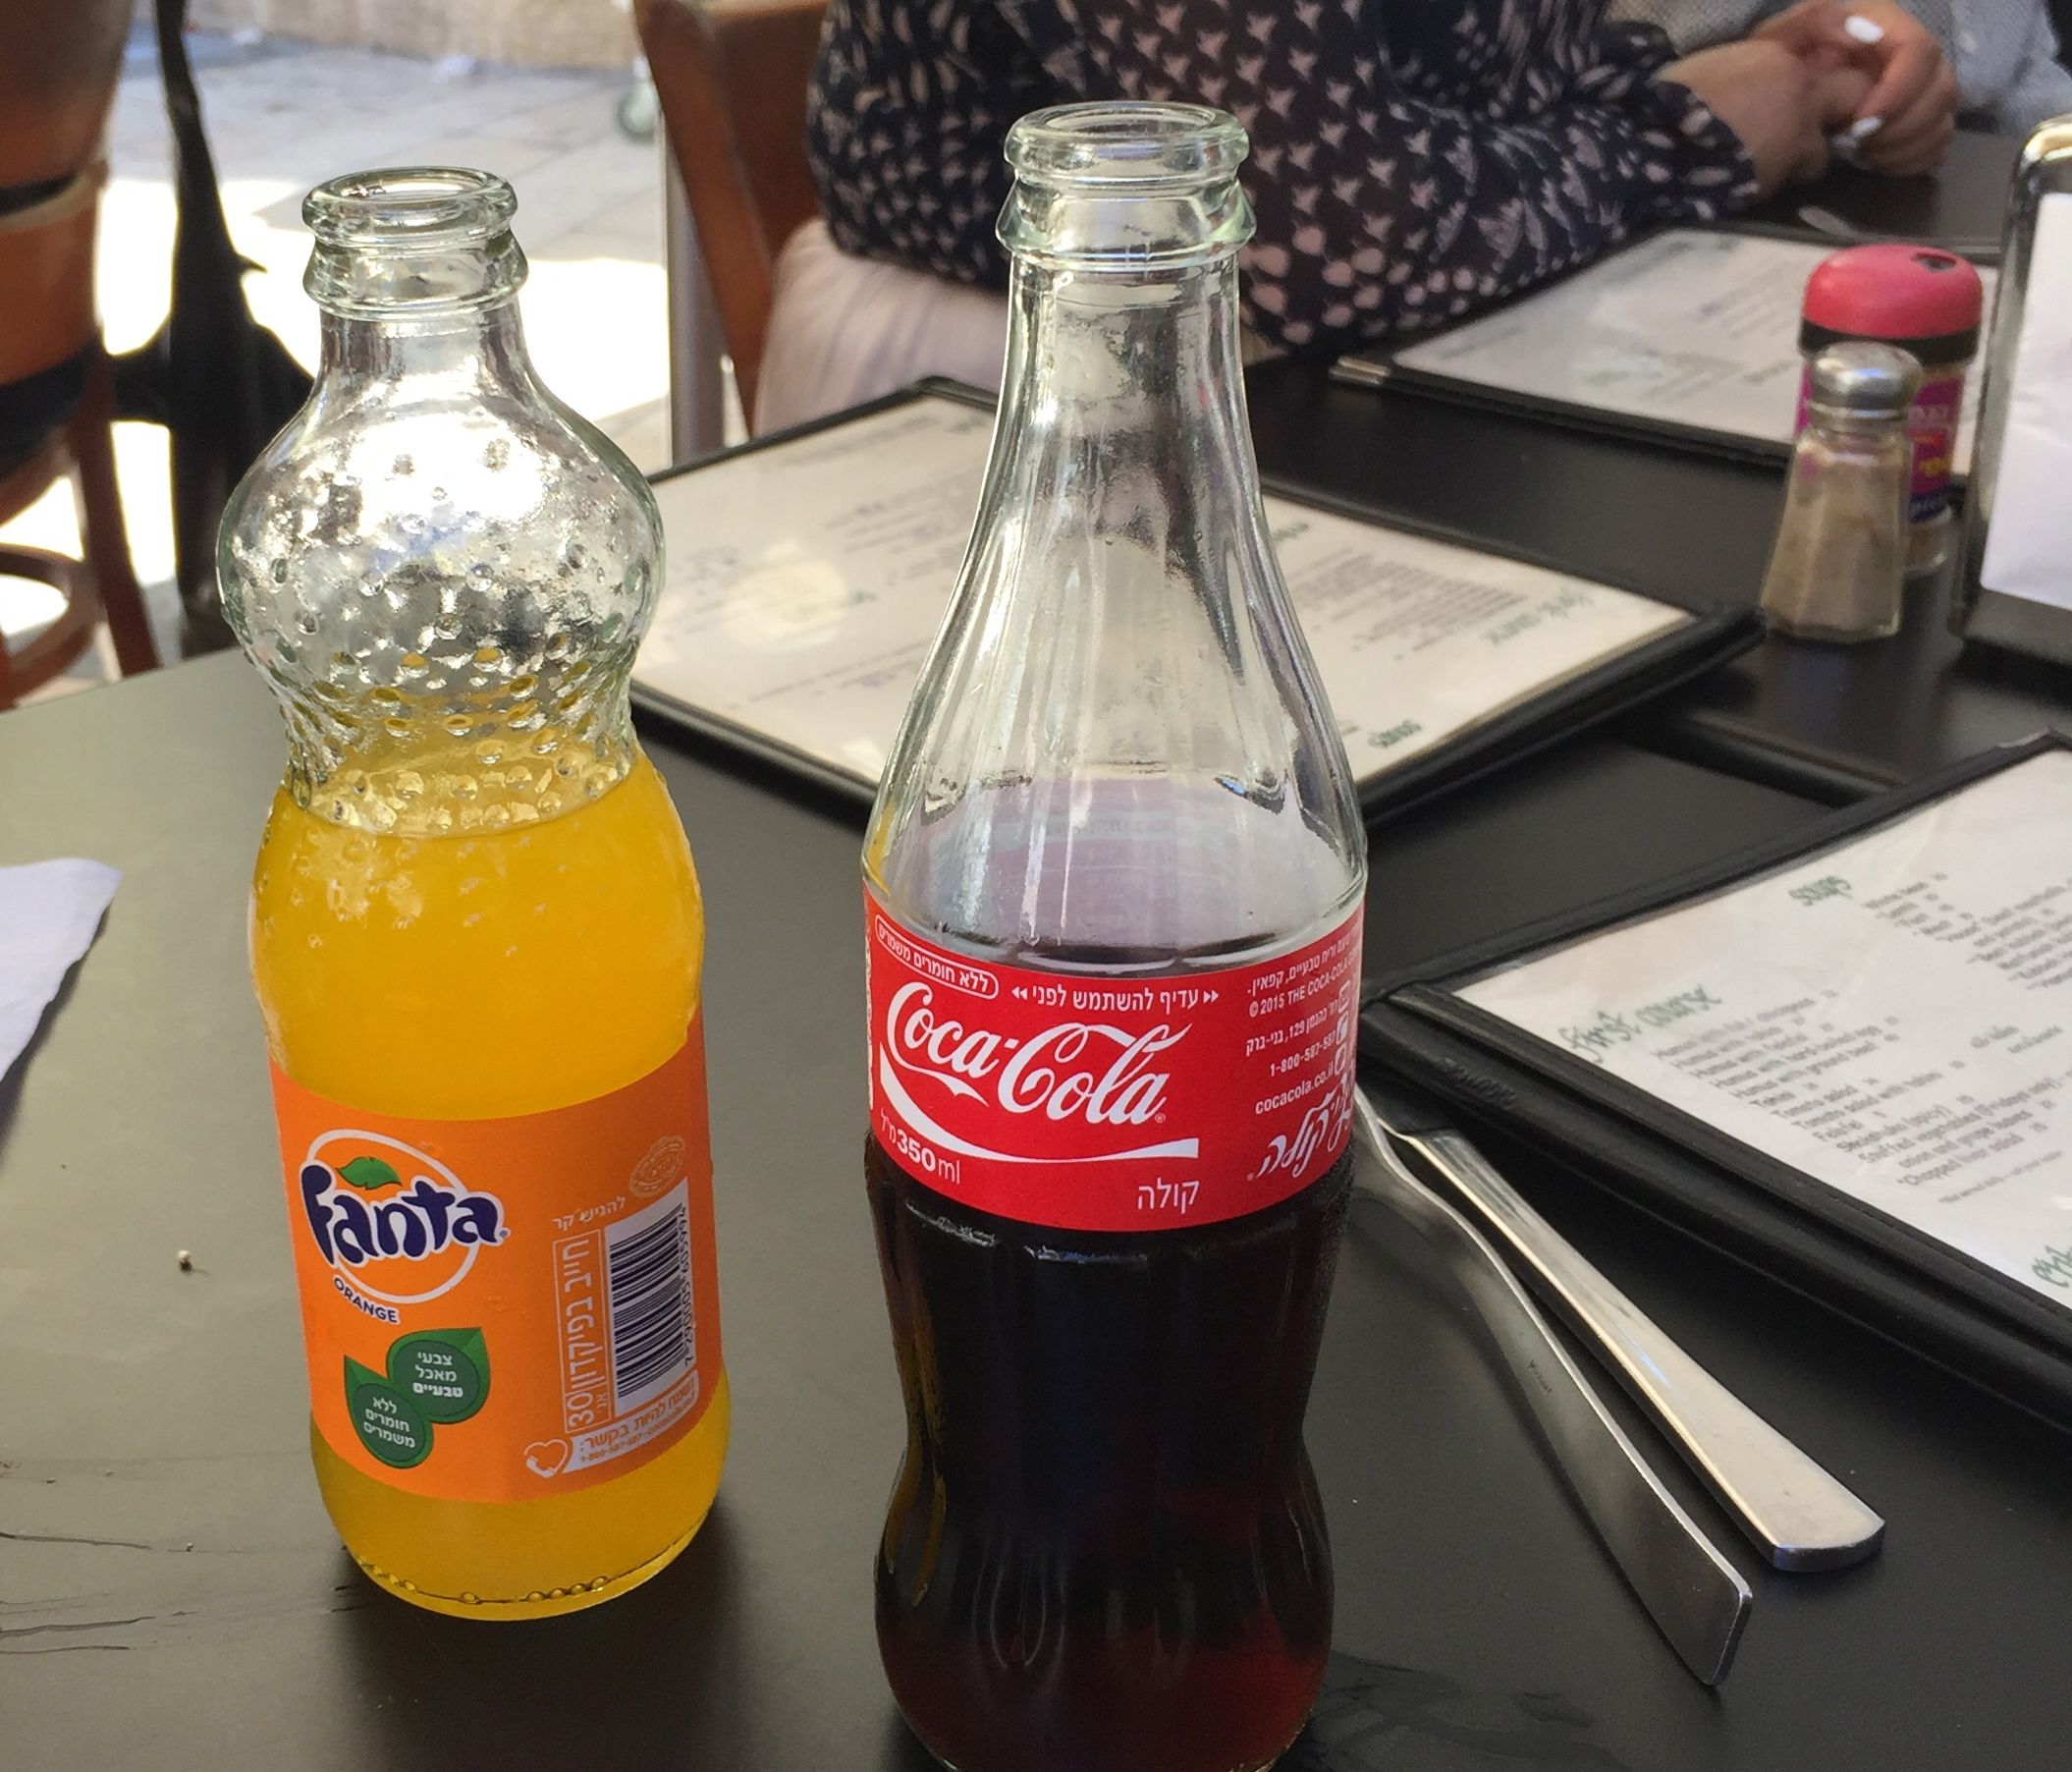 Fanta and Coke are offered all over the world as a preferred drink.